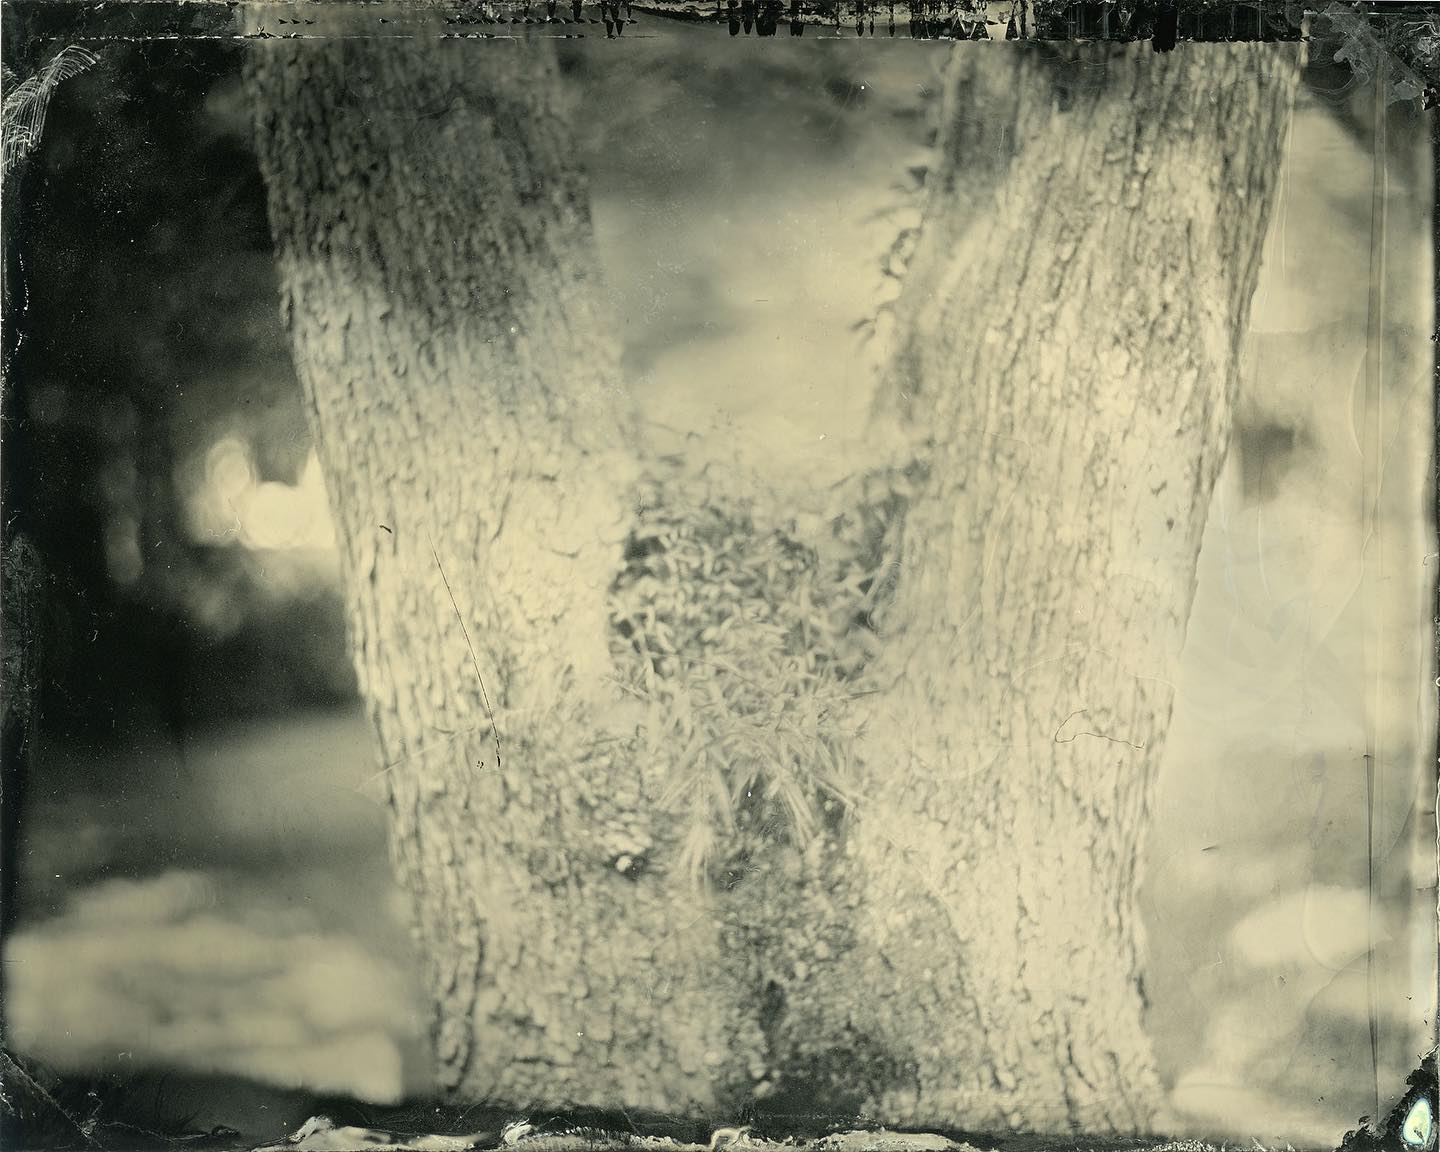 Tree

I shot this tree in front of our house this morning because itâs summer and itâs Friday and itâs my birthday so I took the day off and wanted to do something with it. Shot on my #speedgraphic using a @kodak #aeroektar178mm lens wide open and my new #chromagraphica #4x5 #wetplatecollodion film holder that arrived a couple of days ago. I shot three photos, and this was probably the most technically correct. I wanted to work on my collodion pouring technique since my first plates had so many problems. This was my second attempt at this shot this morning; the first had a developer island. So I bumped up the amount of developer I was pouring on the plate from 15ml to 20ml and that seems to have solved that issue. #allthroughalenspodcast #largeformat #wetplate #tintype #filmphotography